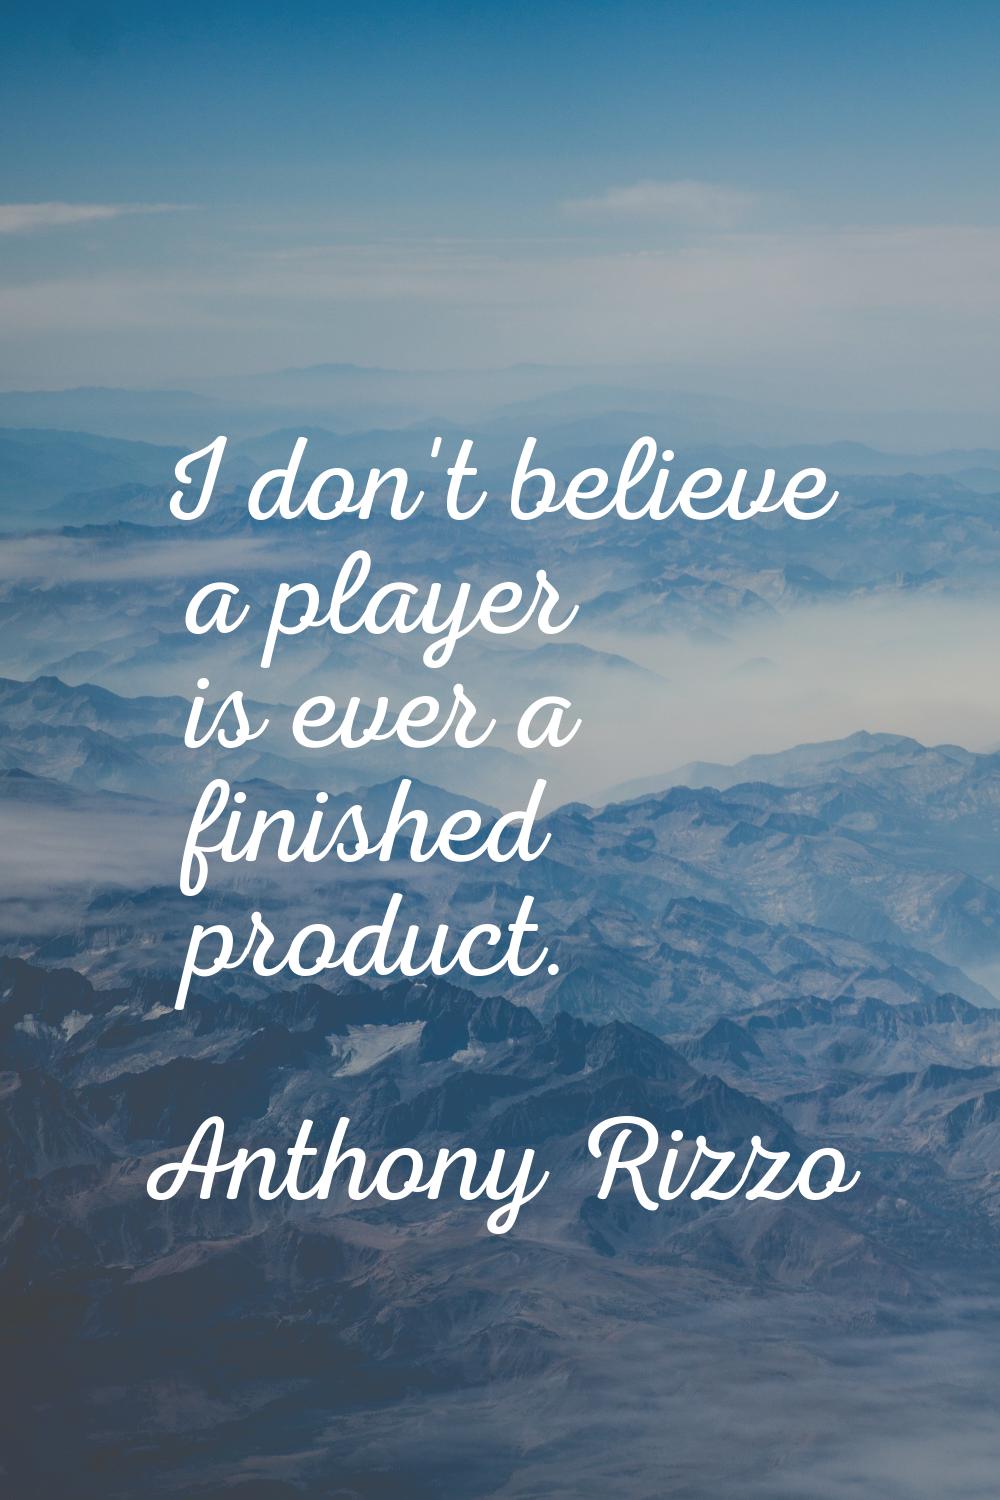 I don't believe a player is ever a finished product.